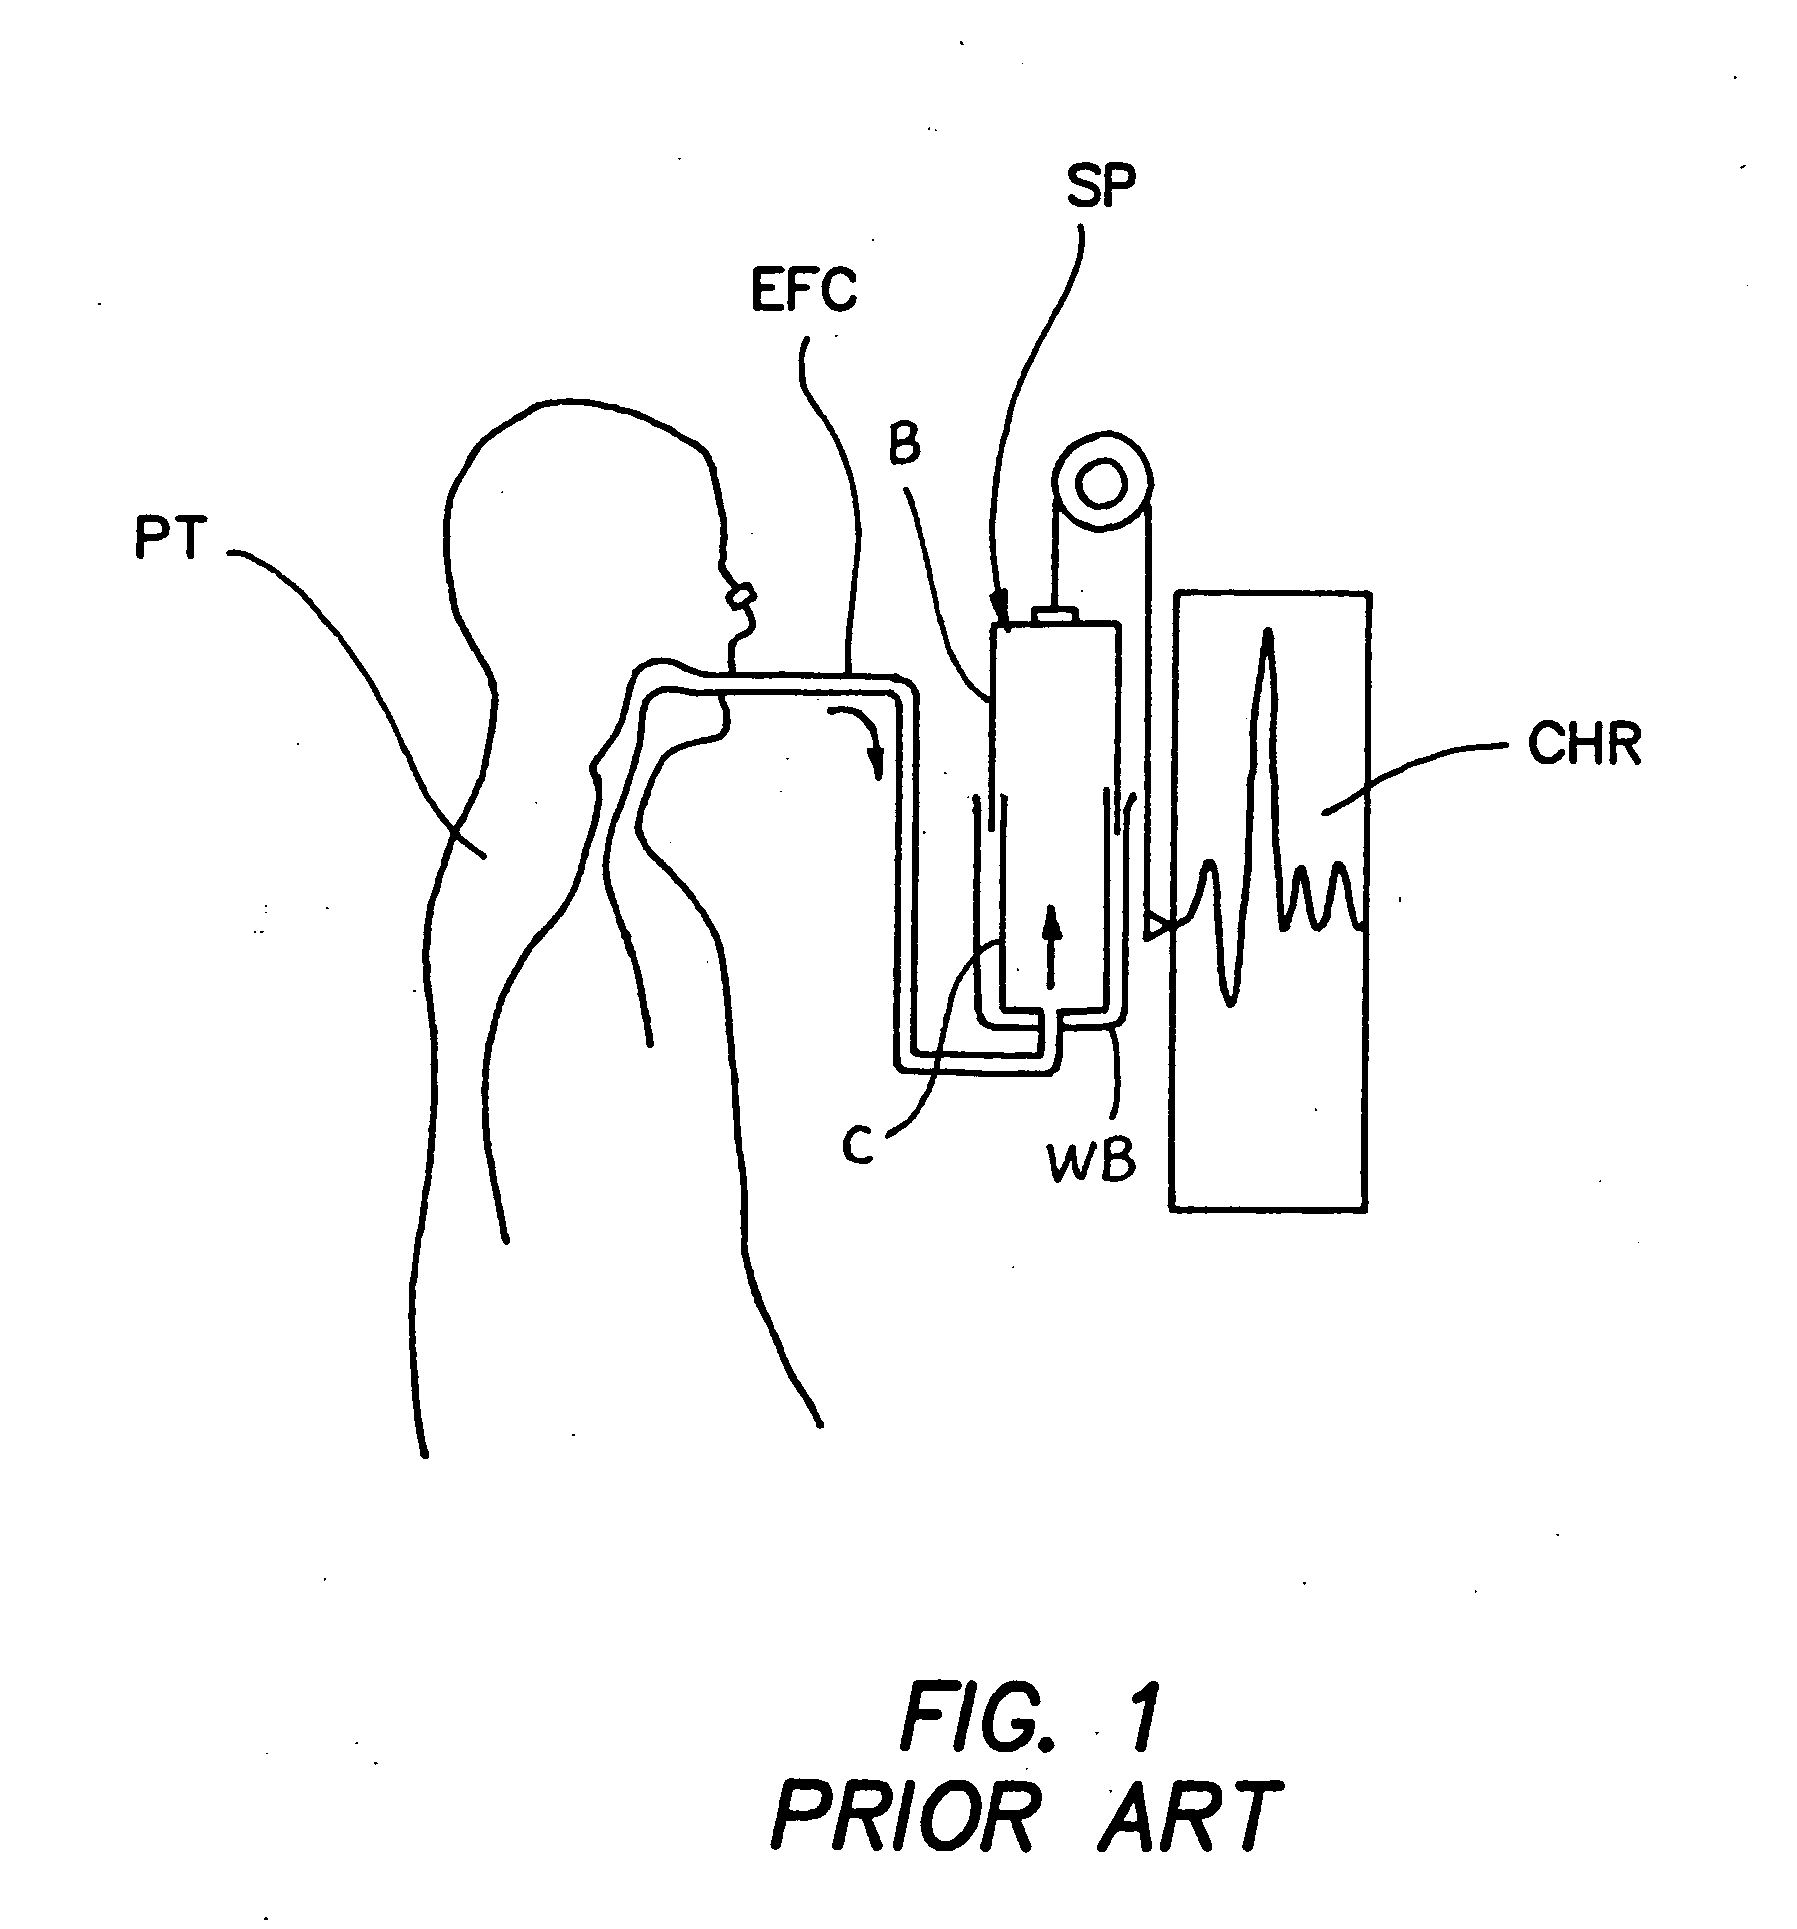 Stand-alone circle circuit with co2 absorption and sensitive spirometry for measurement of pulmonary uptake